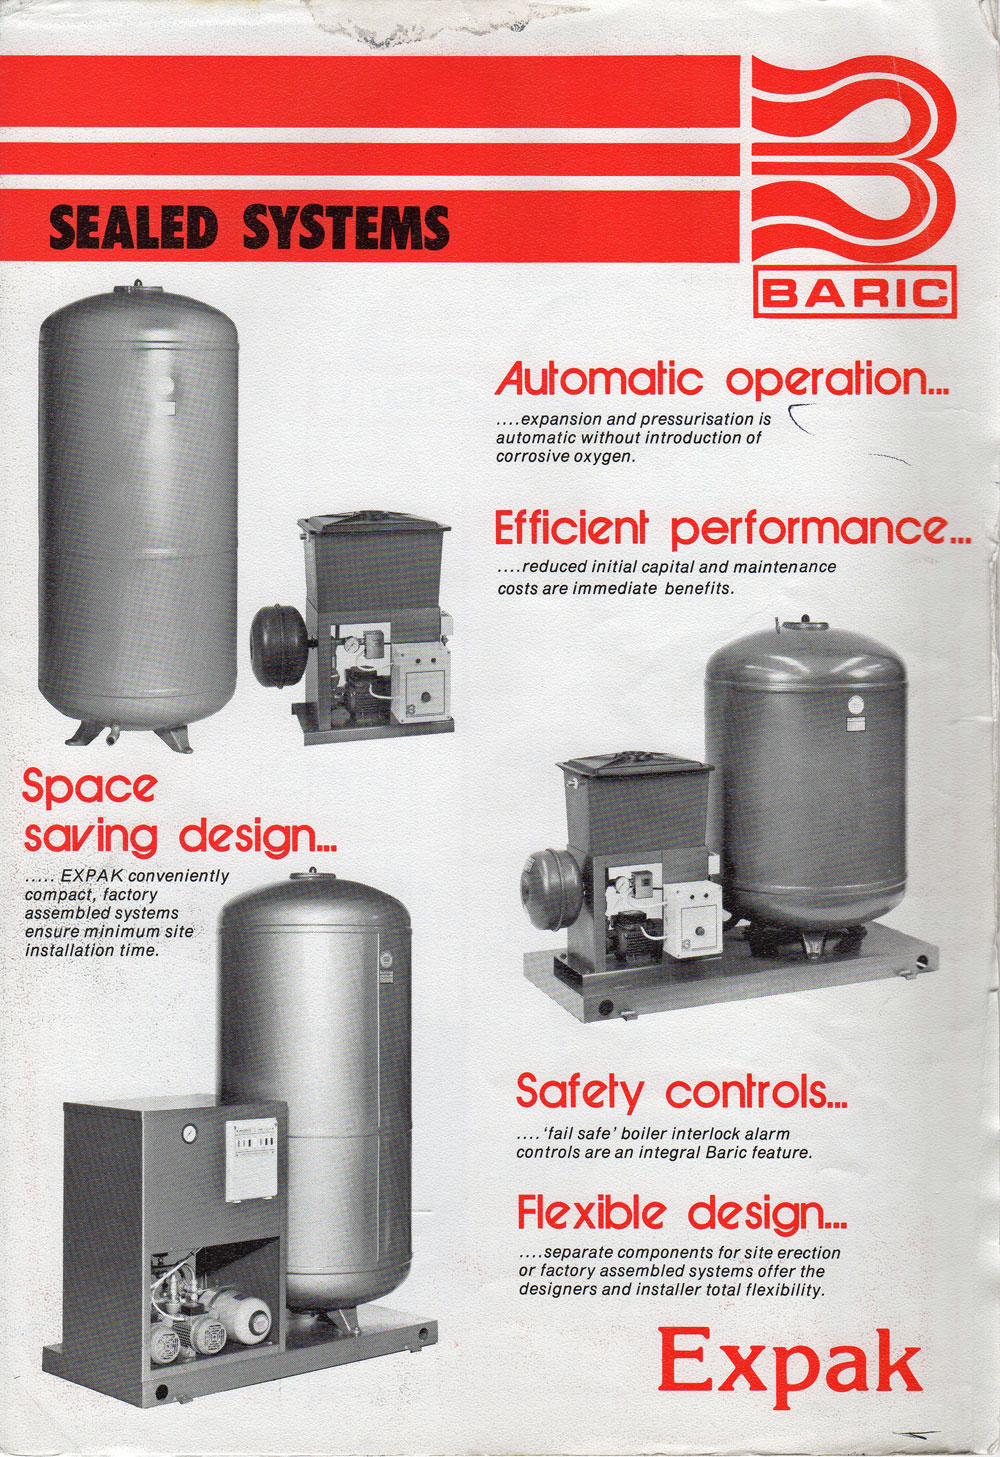 baric pumps expak sealed systems brochure - 1987